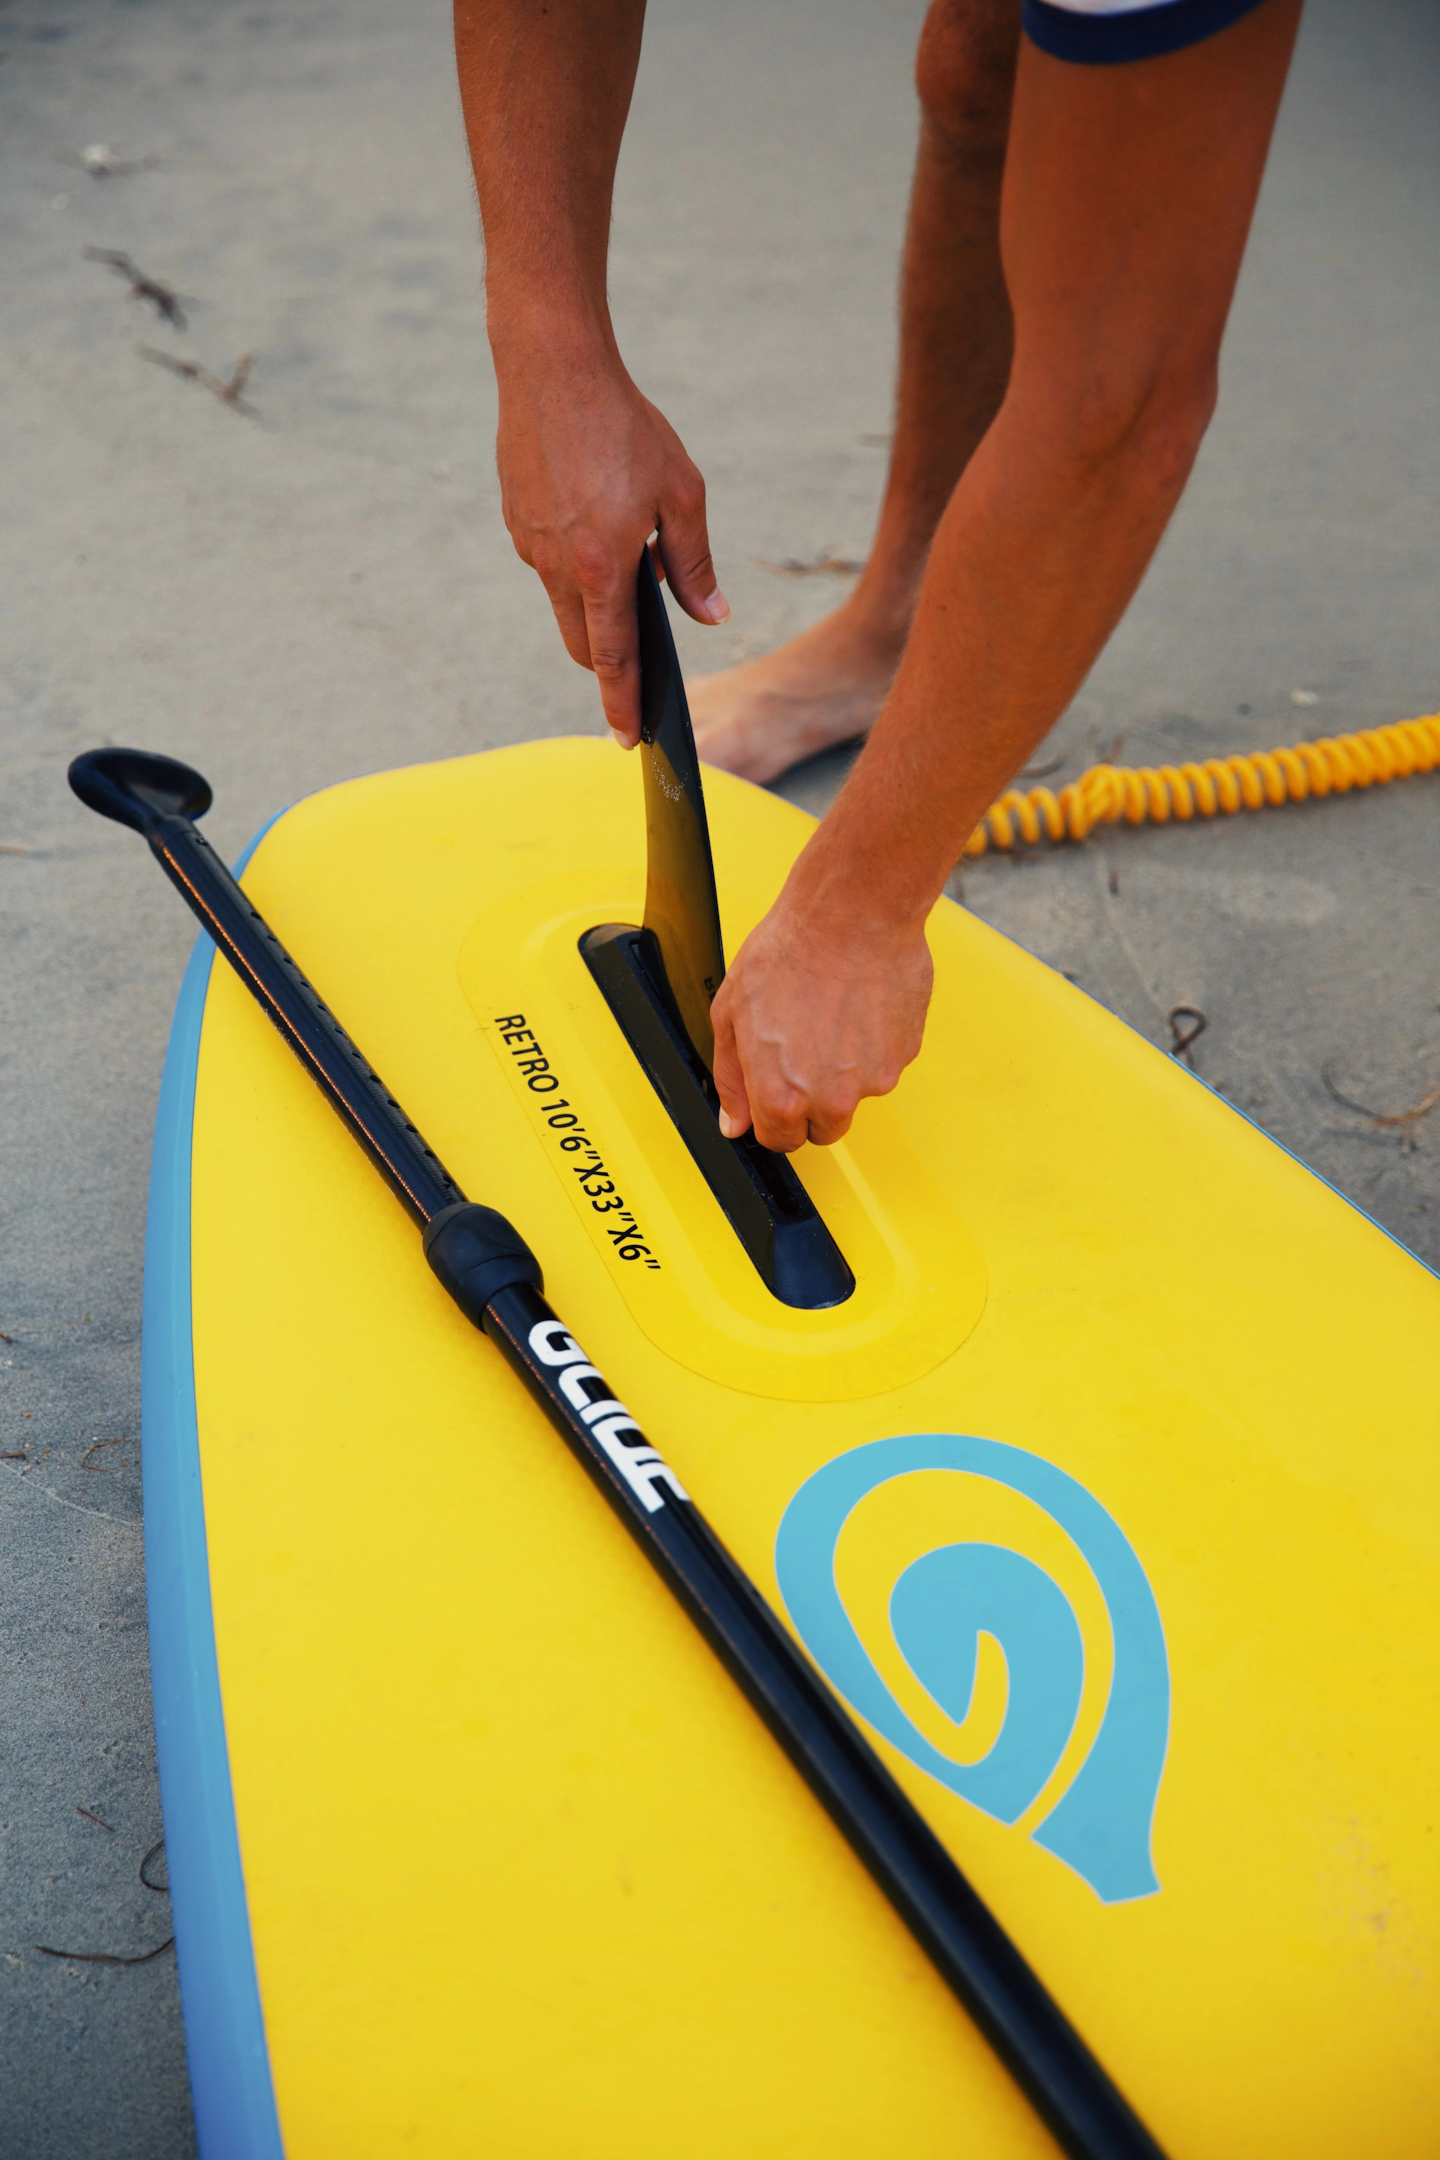 paddle board fin,stand up paddle board or inflatable paddle boards,dual tab fin box,center fin box,race fins on inflatable paddle board,read our blog for basic fin shapes